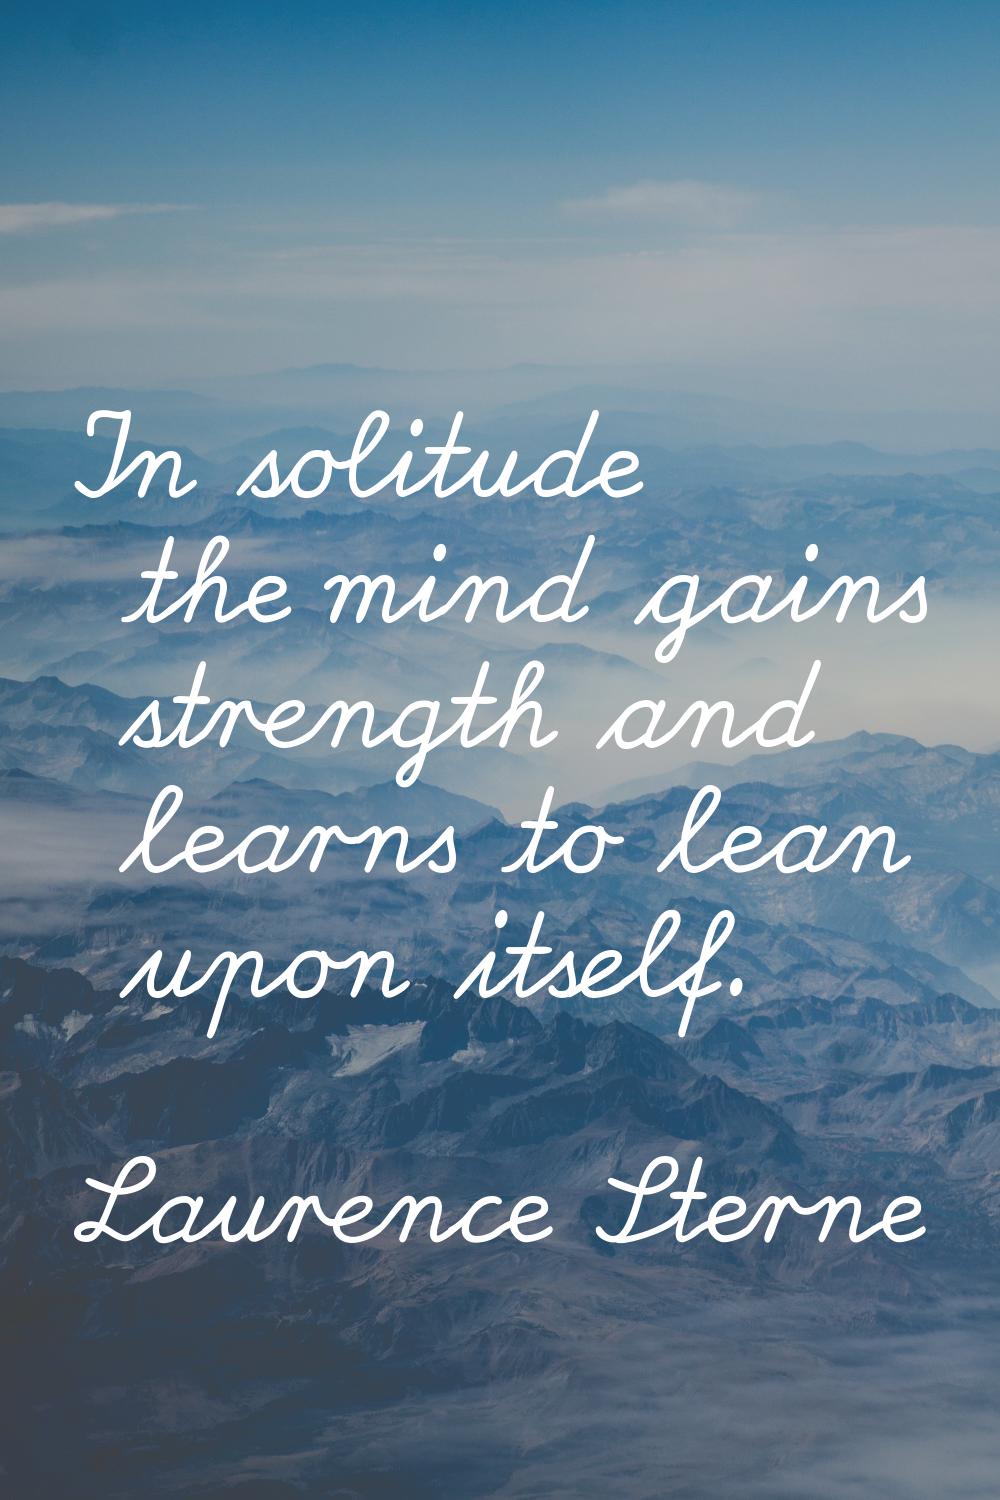 In solitude the mind gains strength and learns to lean upon itself.